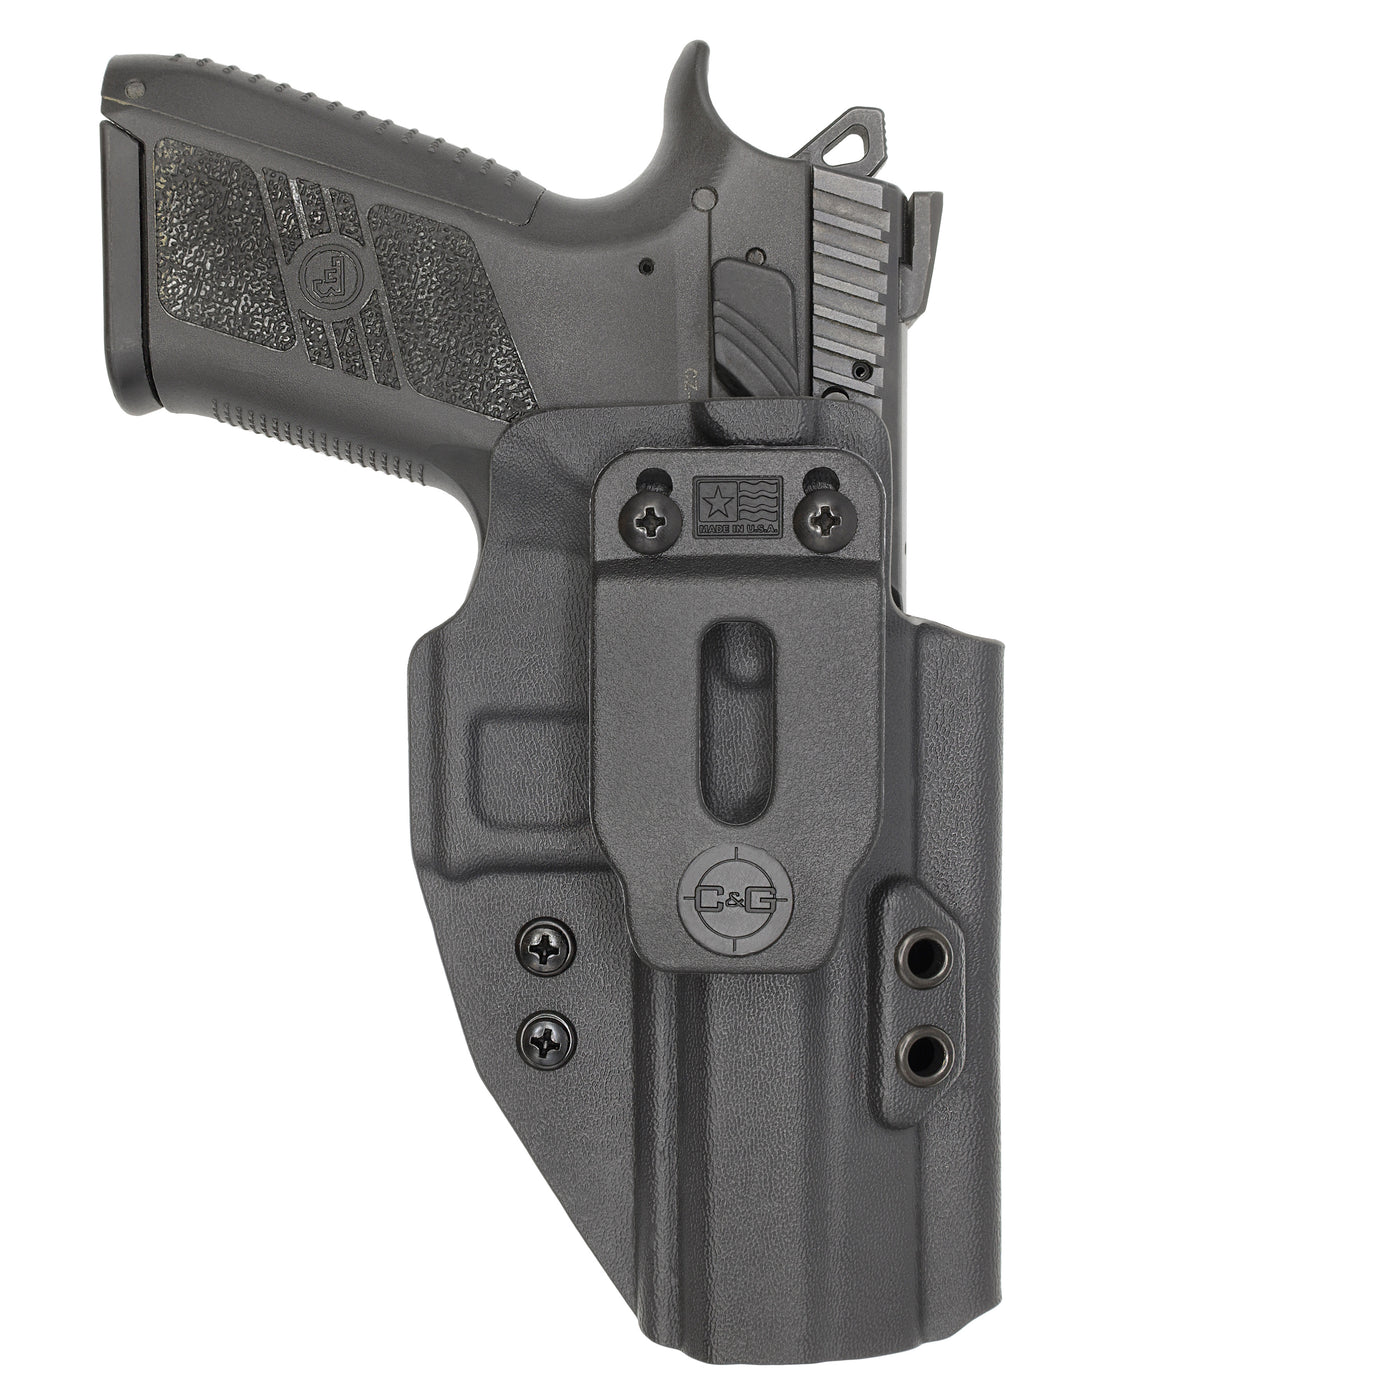 C&G Holsters Quickship IWB Covert CZ P09 in holstered position